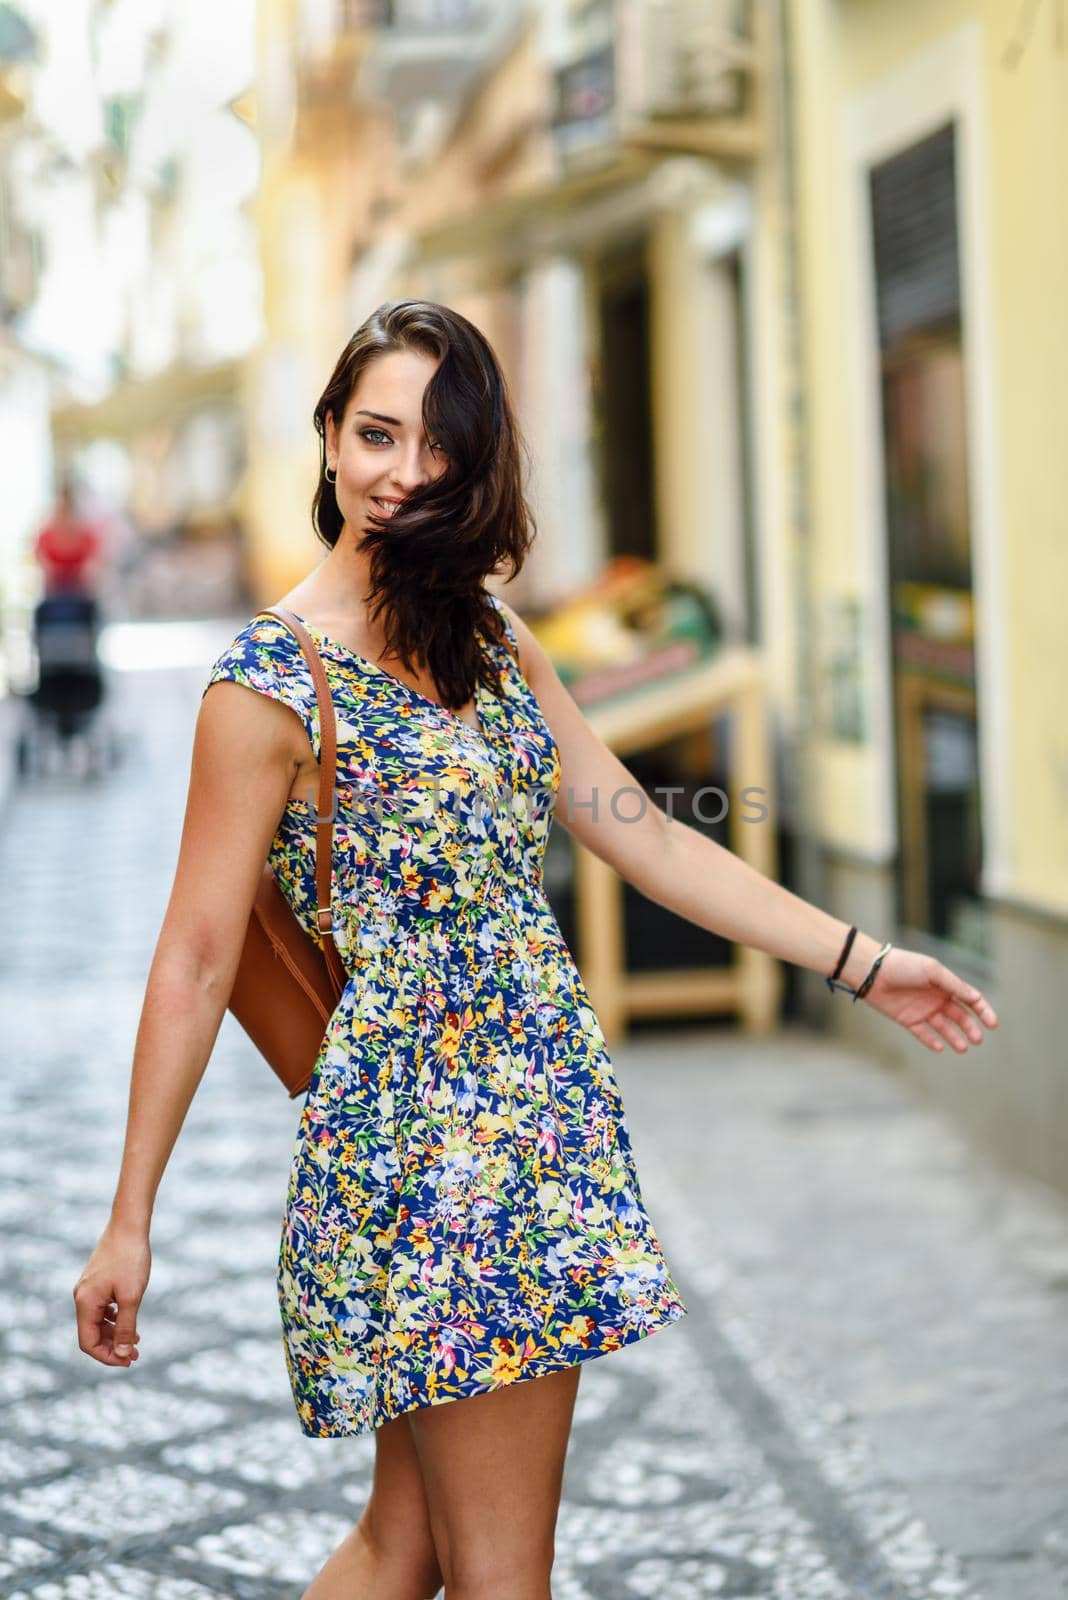 Happy young woman with blue eyes smiling outdoors. Girl wearing flower dress raising arms in urban background. Happiness concept.